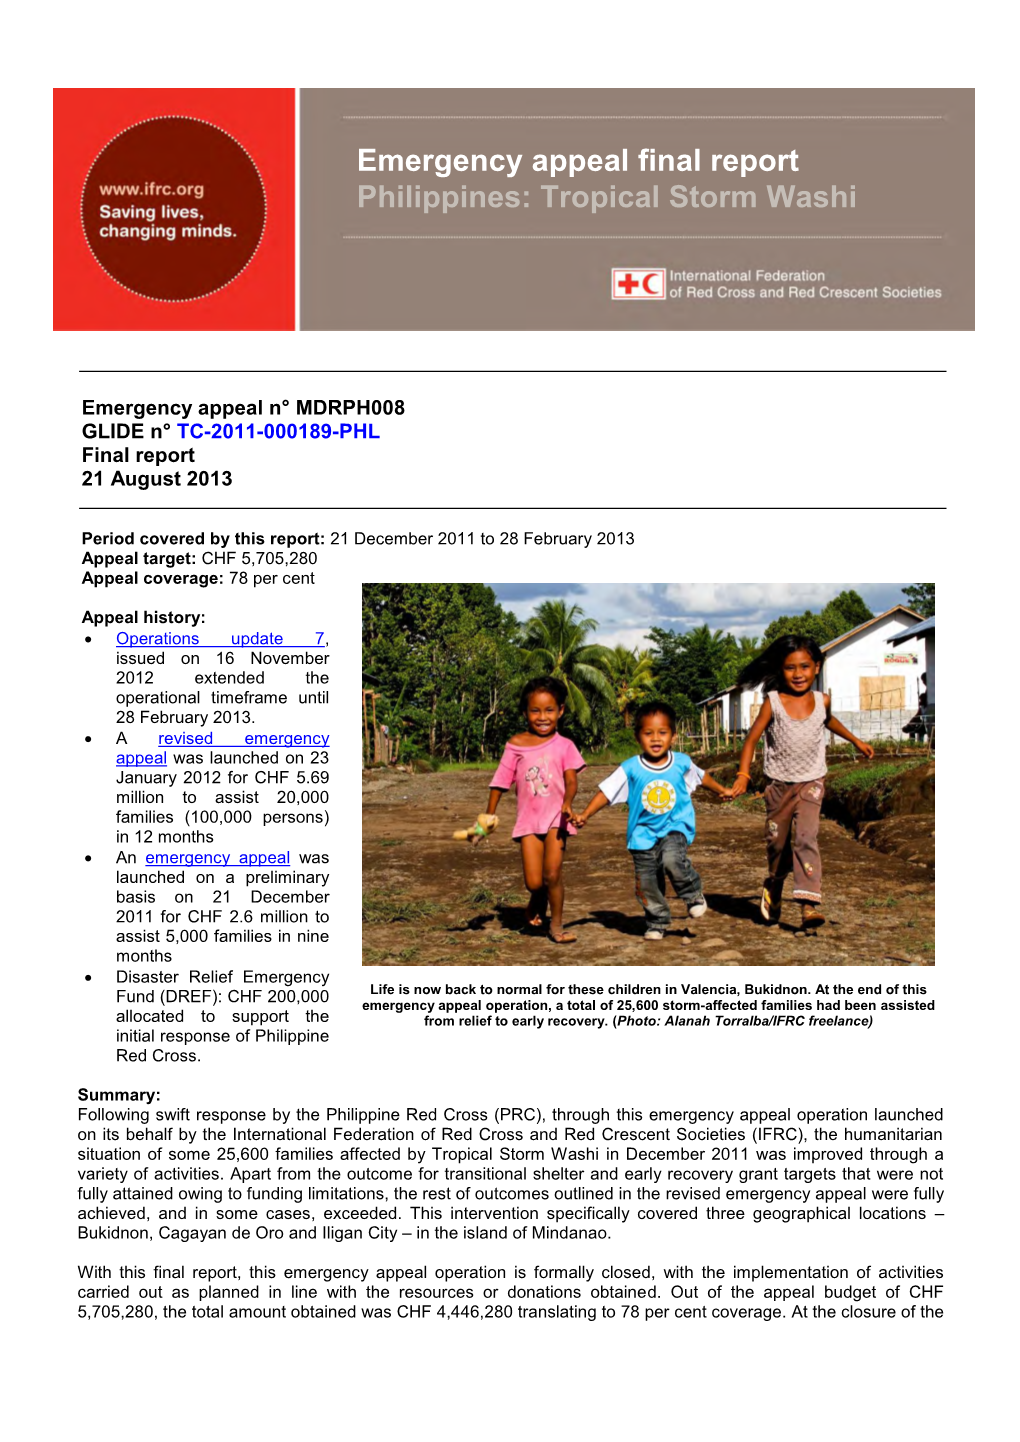 Emergency Appeal Final Report Philippines: Tropical Storm Washi